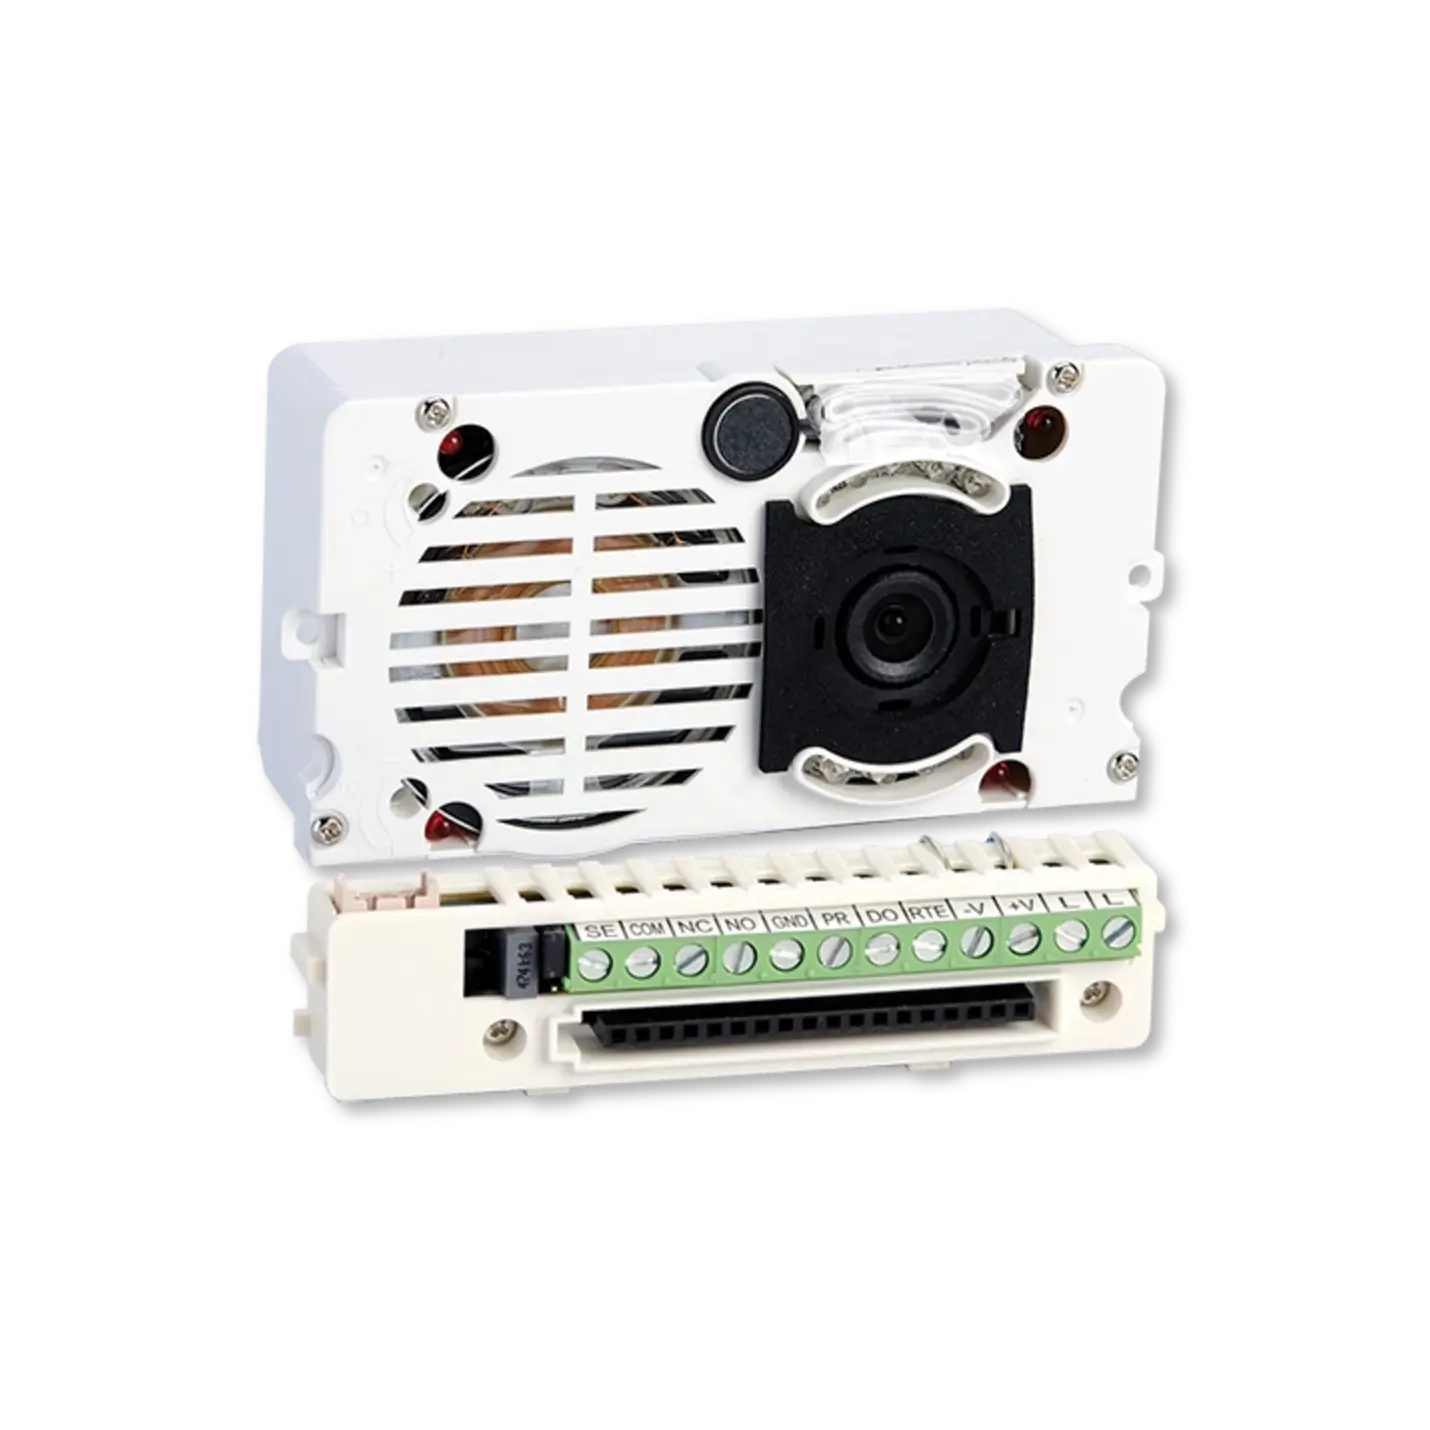 Comelit 4682HD IP Audio/Video Unit For ViP Systems